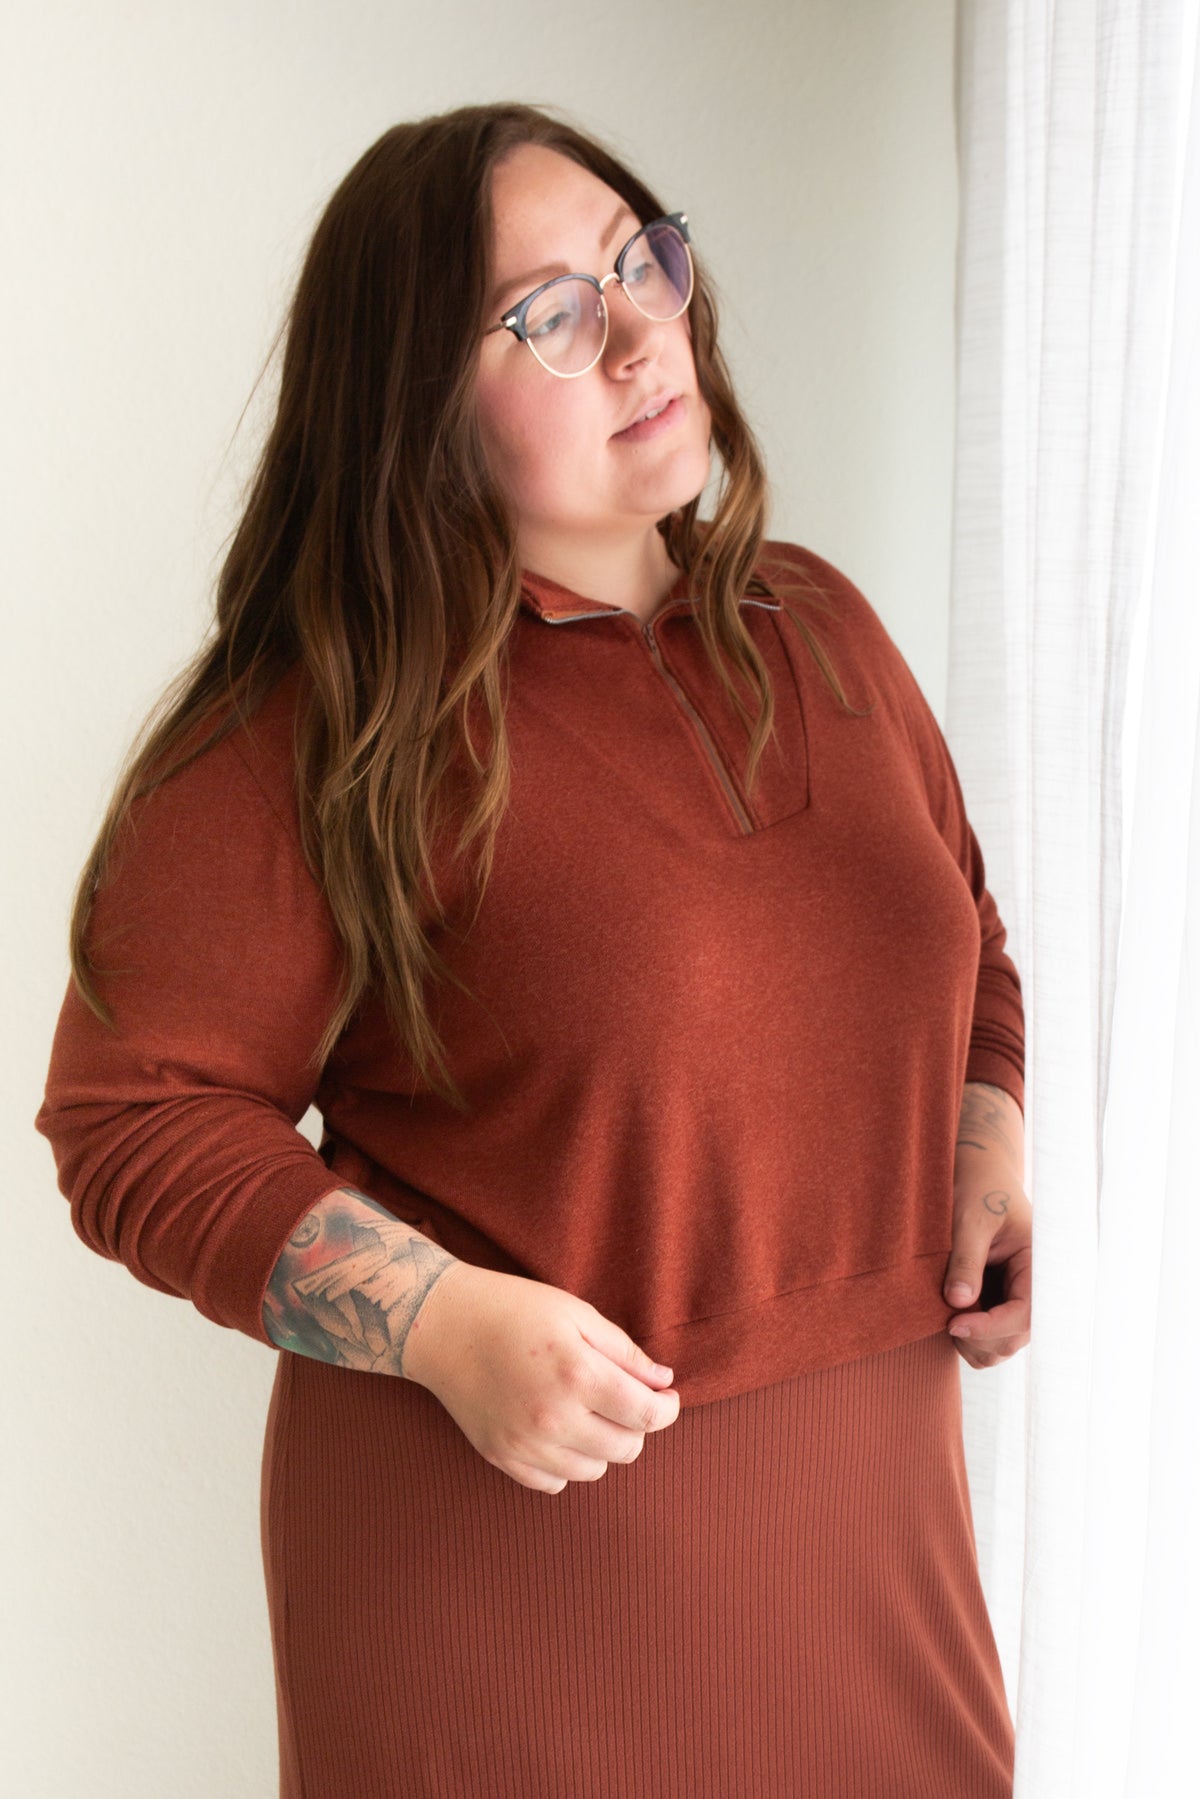 Woman wearing the Hive Pullover sewing pattern from Allie Olson on The Fold Line. A top pattern made in French terry, sweatshirt fleece, or sweater knit fabric, featuring a boxy fit, dropped shoulders, angled front yoke with a centre front zipper, cuffed 